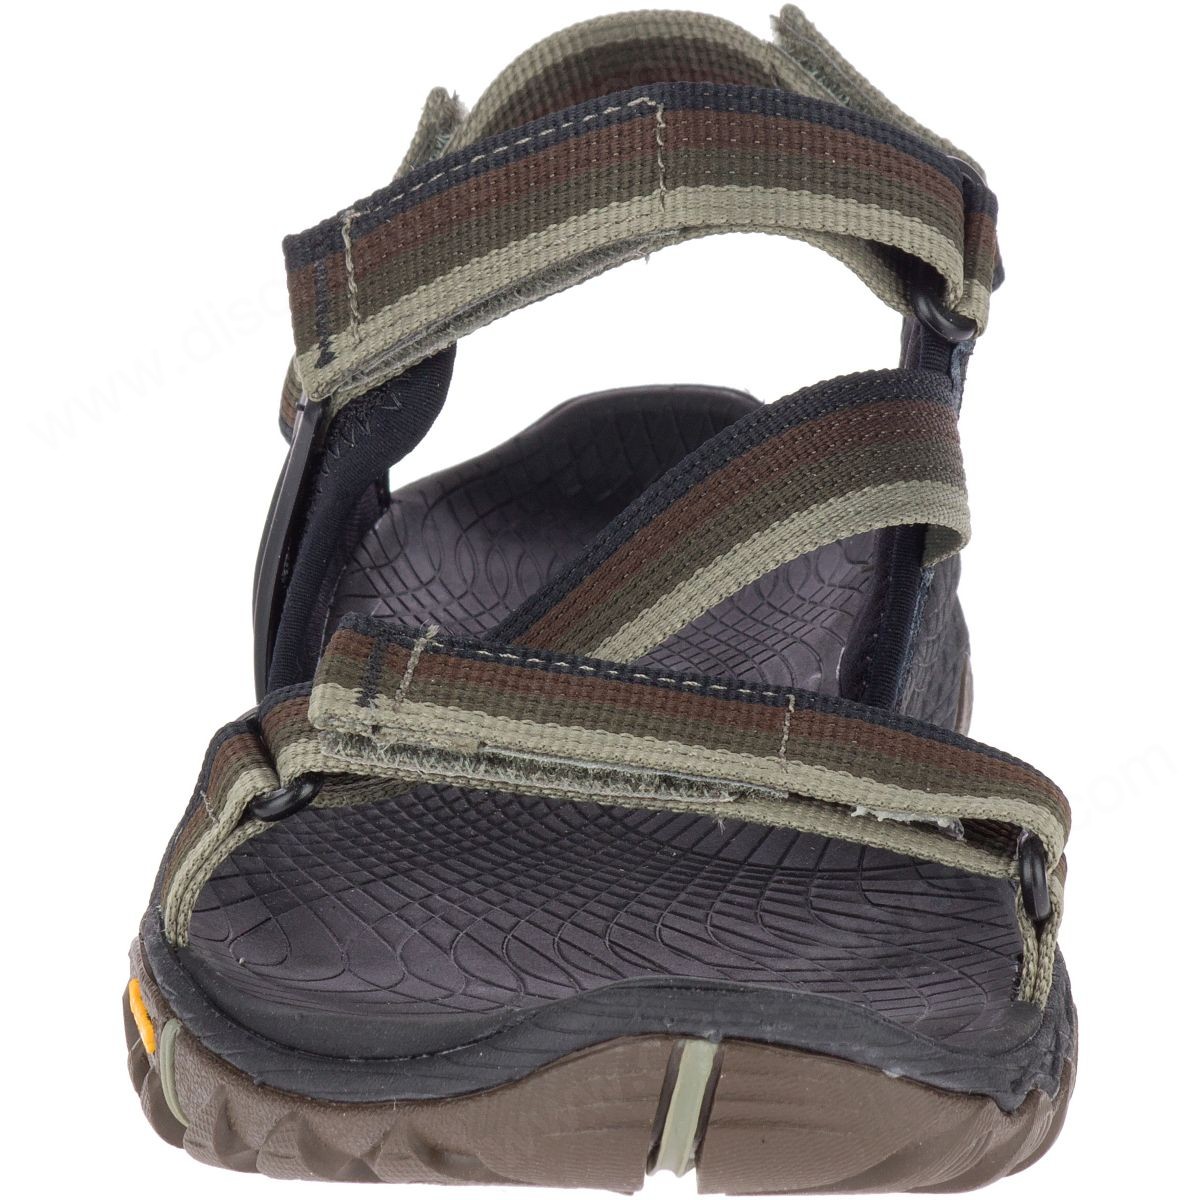 Merrell Man's All Out Blaze Web Dusty Olive - -4